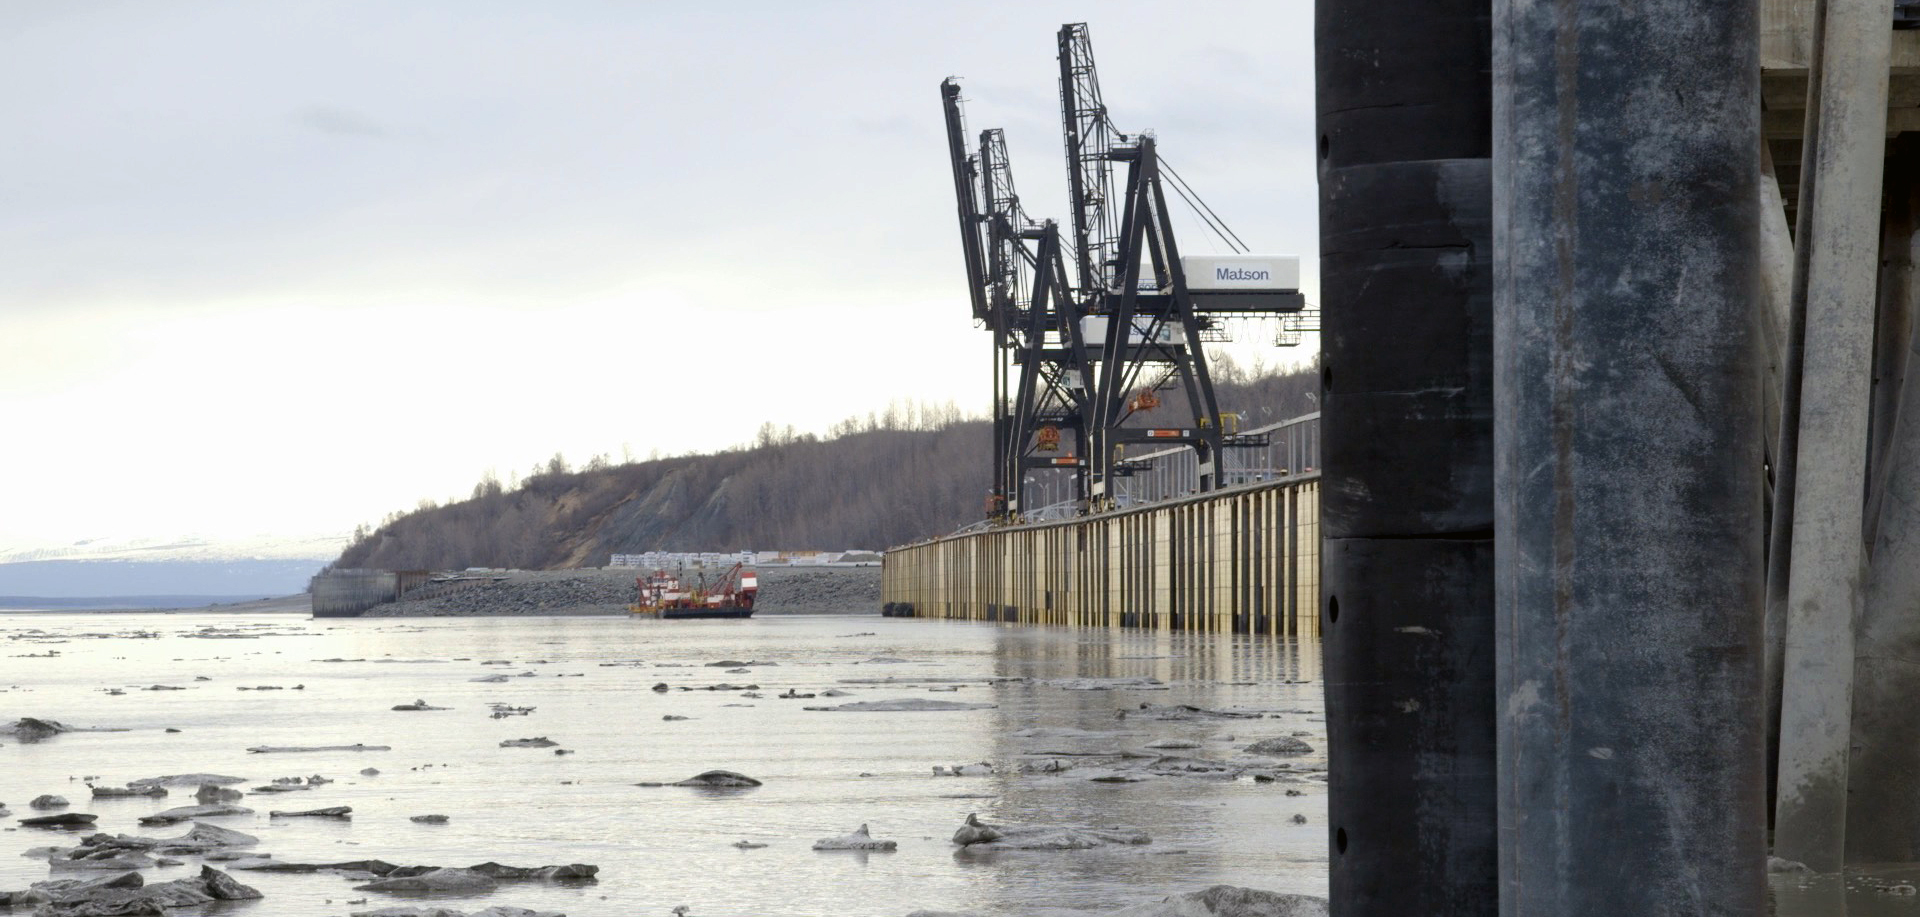 pilings along a body water, two container cranes and a cargo ship